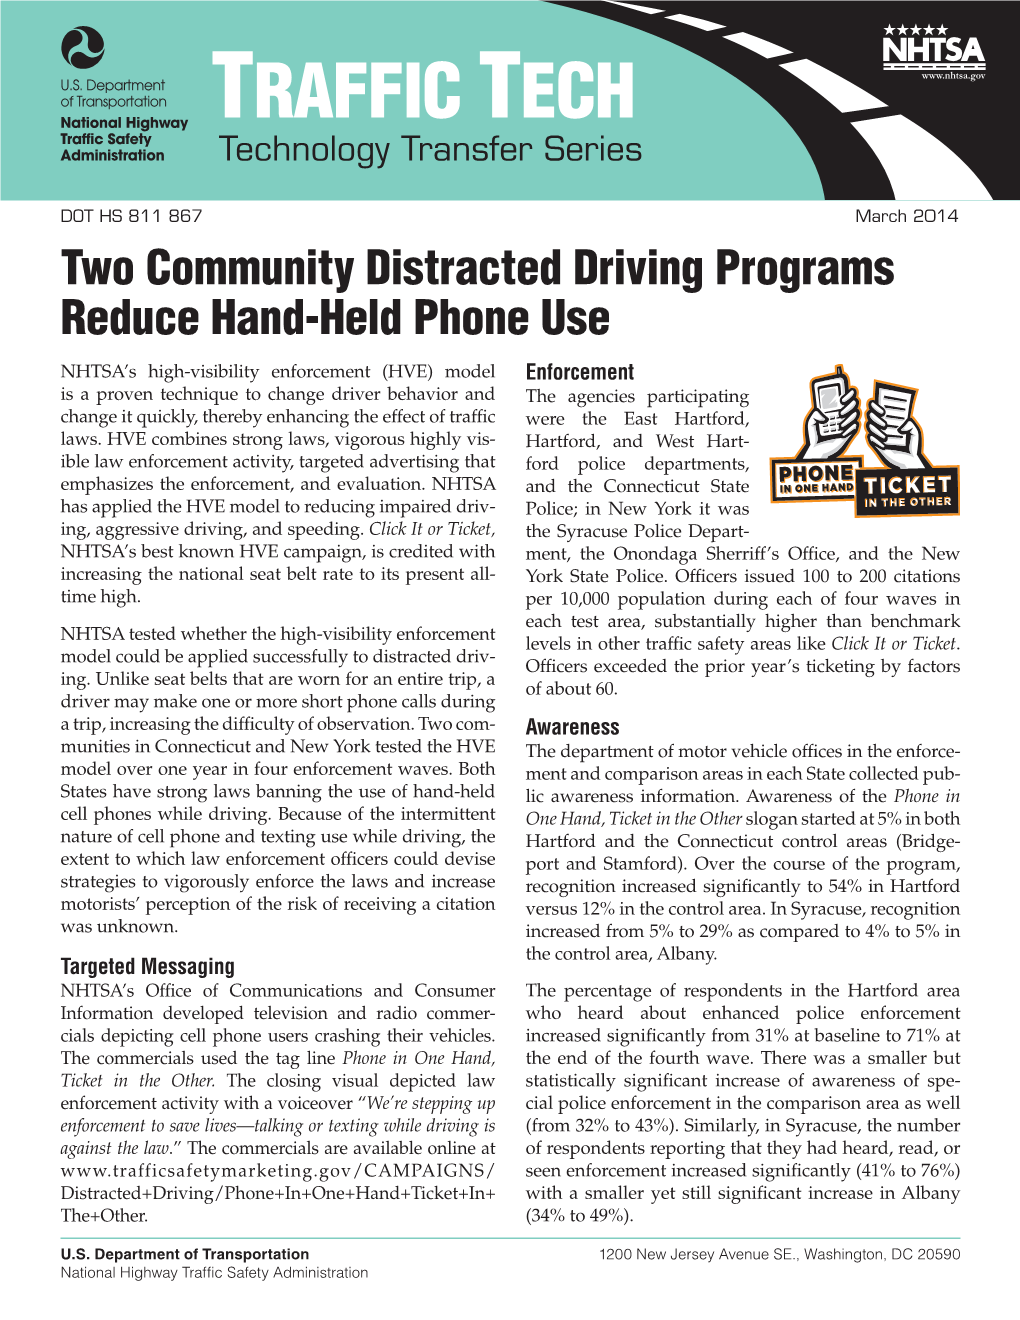 Two Community Distracted Driving Programs Reduce